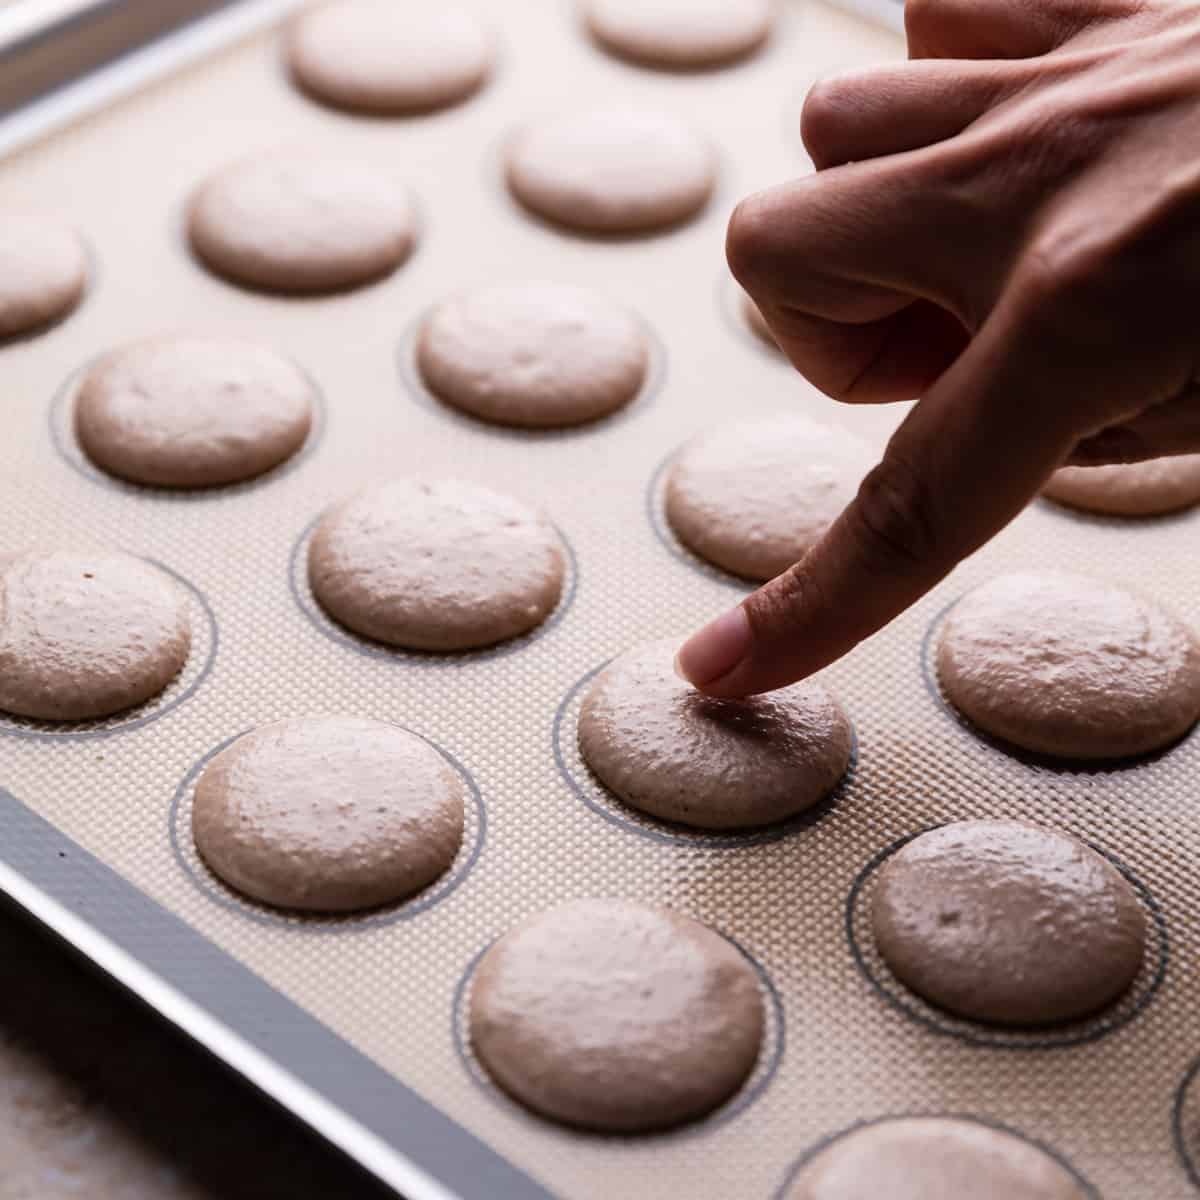 index finger touching gingerbread macaron piped on silicone baking mat.